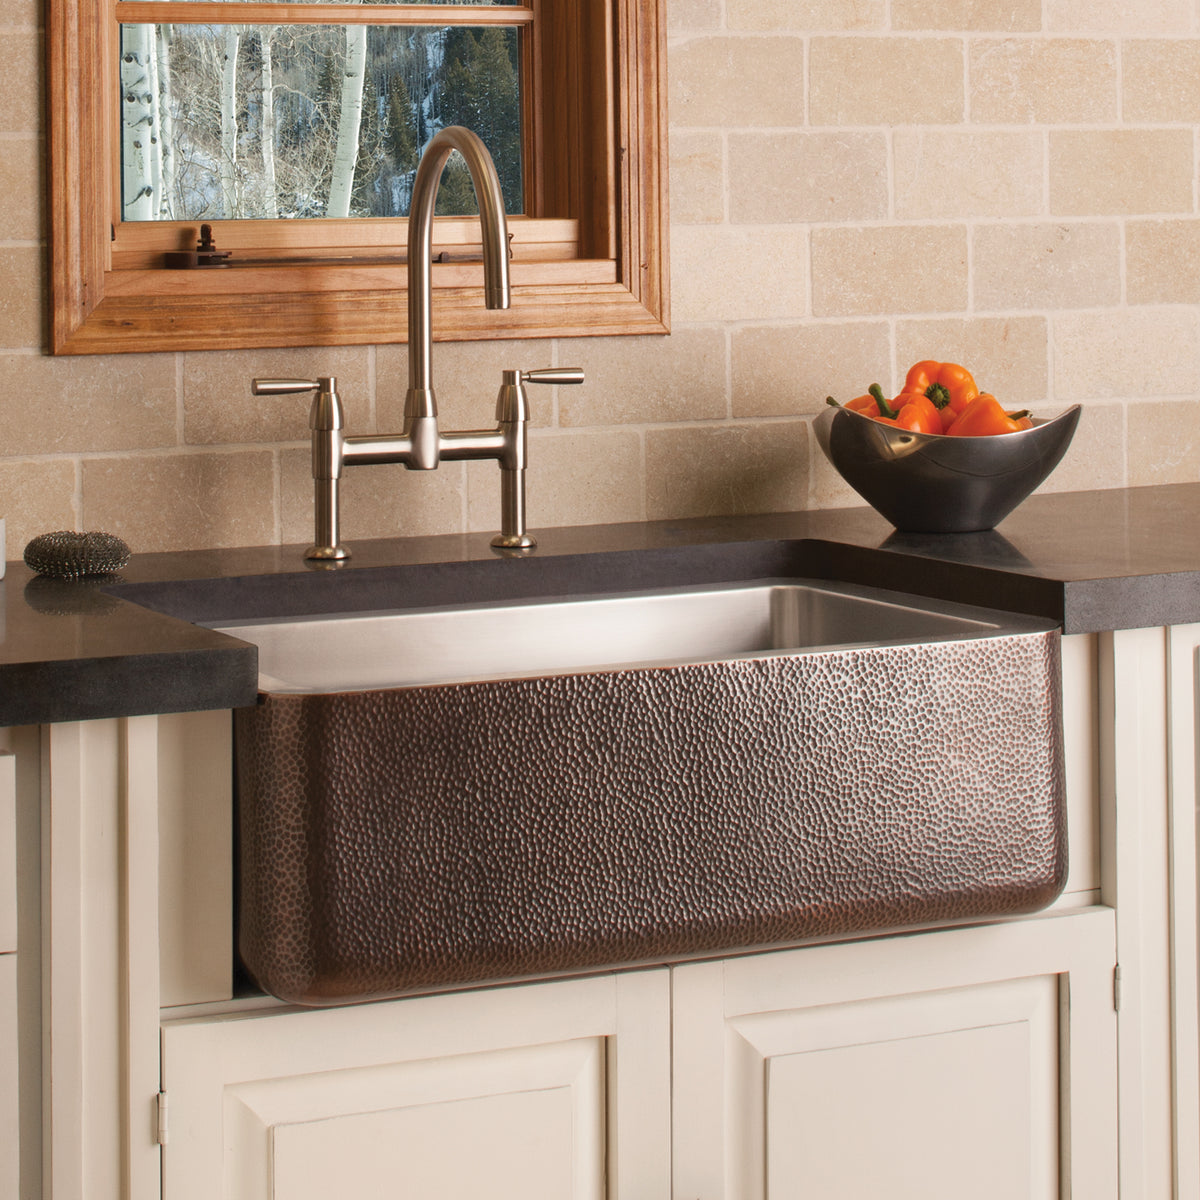 Farmhouse sink with stainless steel interior and hammered copper exterior image 3 of 4